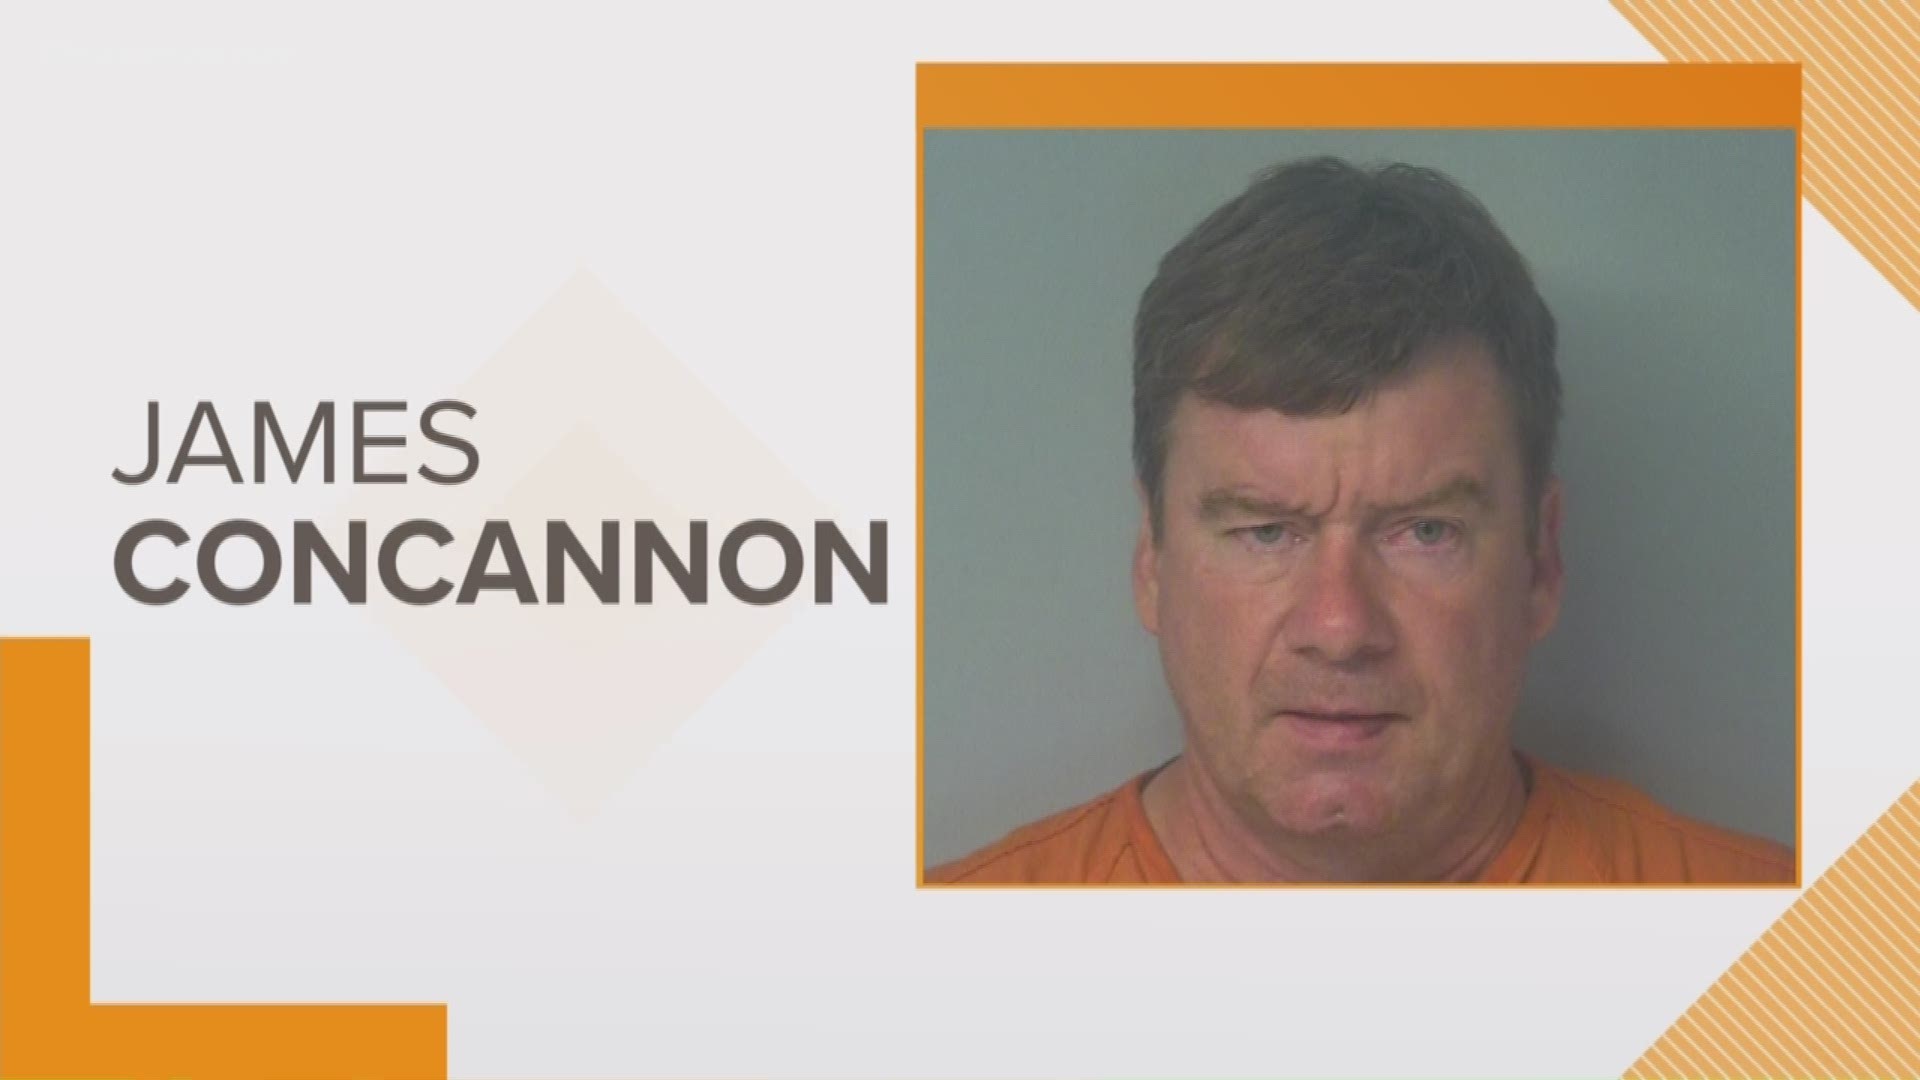 Police arrested Michael Concannon after an 8-year-old girl and a 15-year-old girl said he touched them at the doughnut shop on Richmond Road.